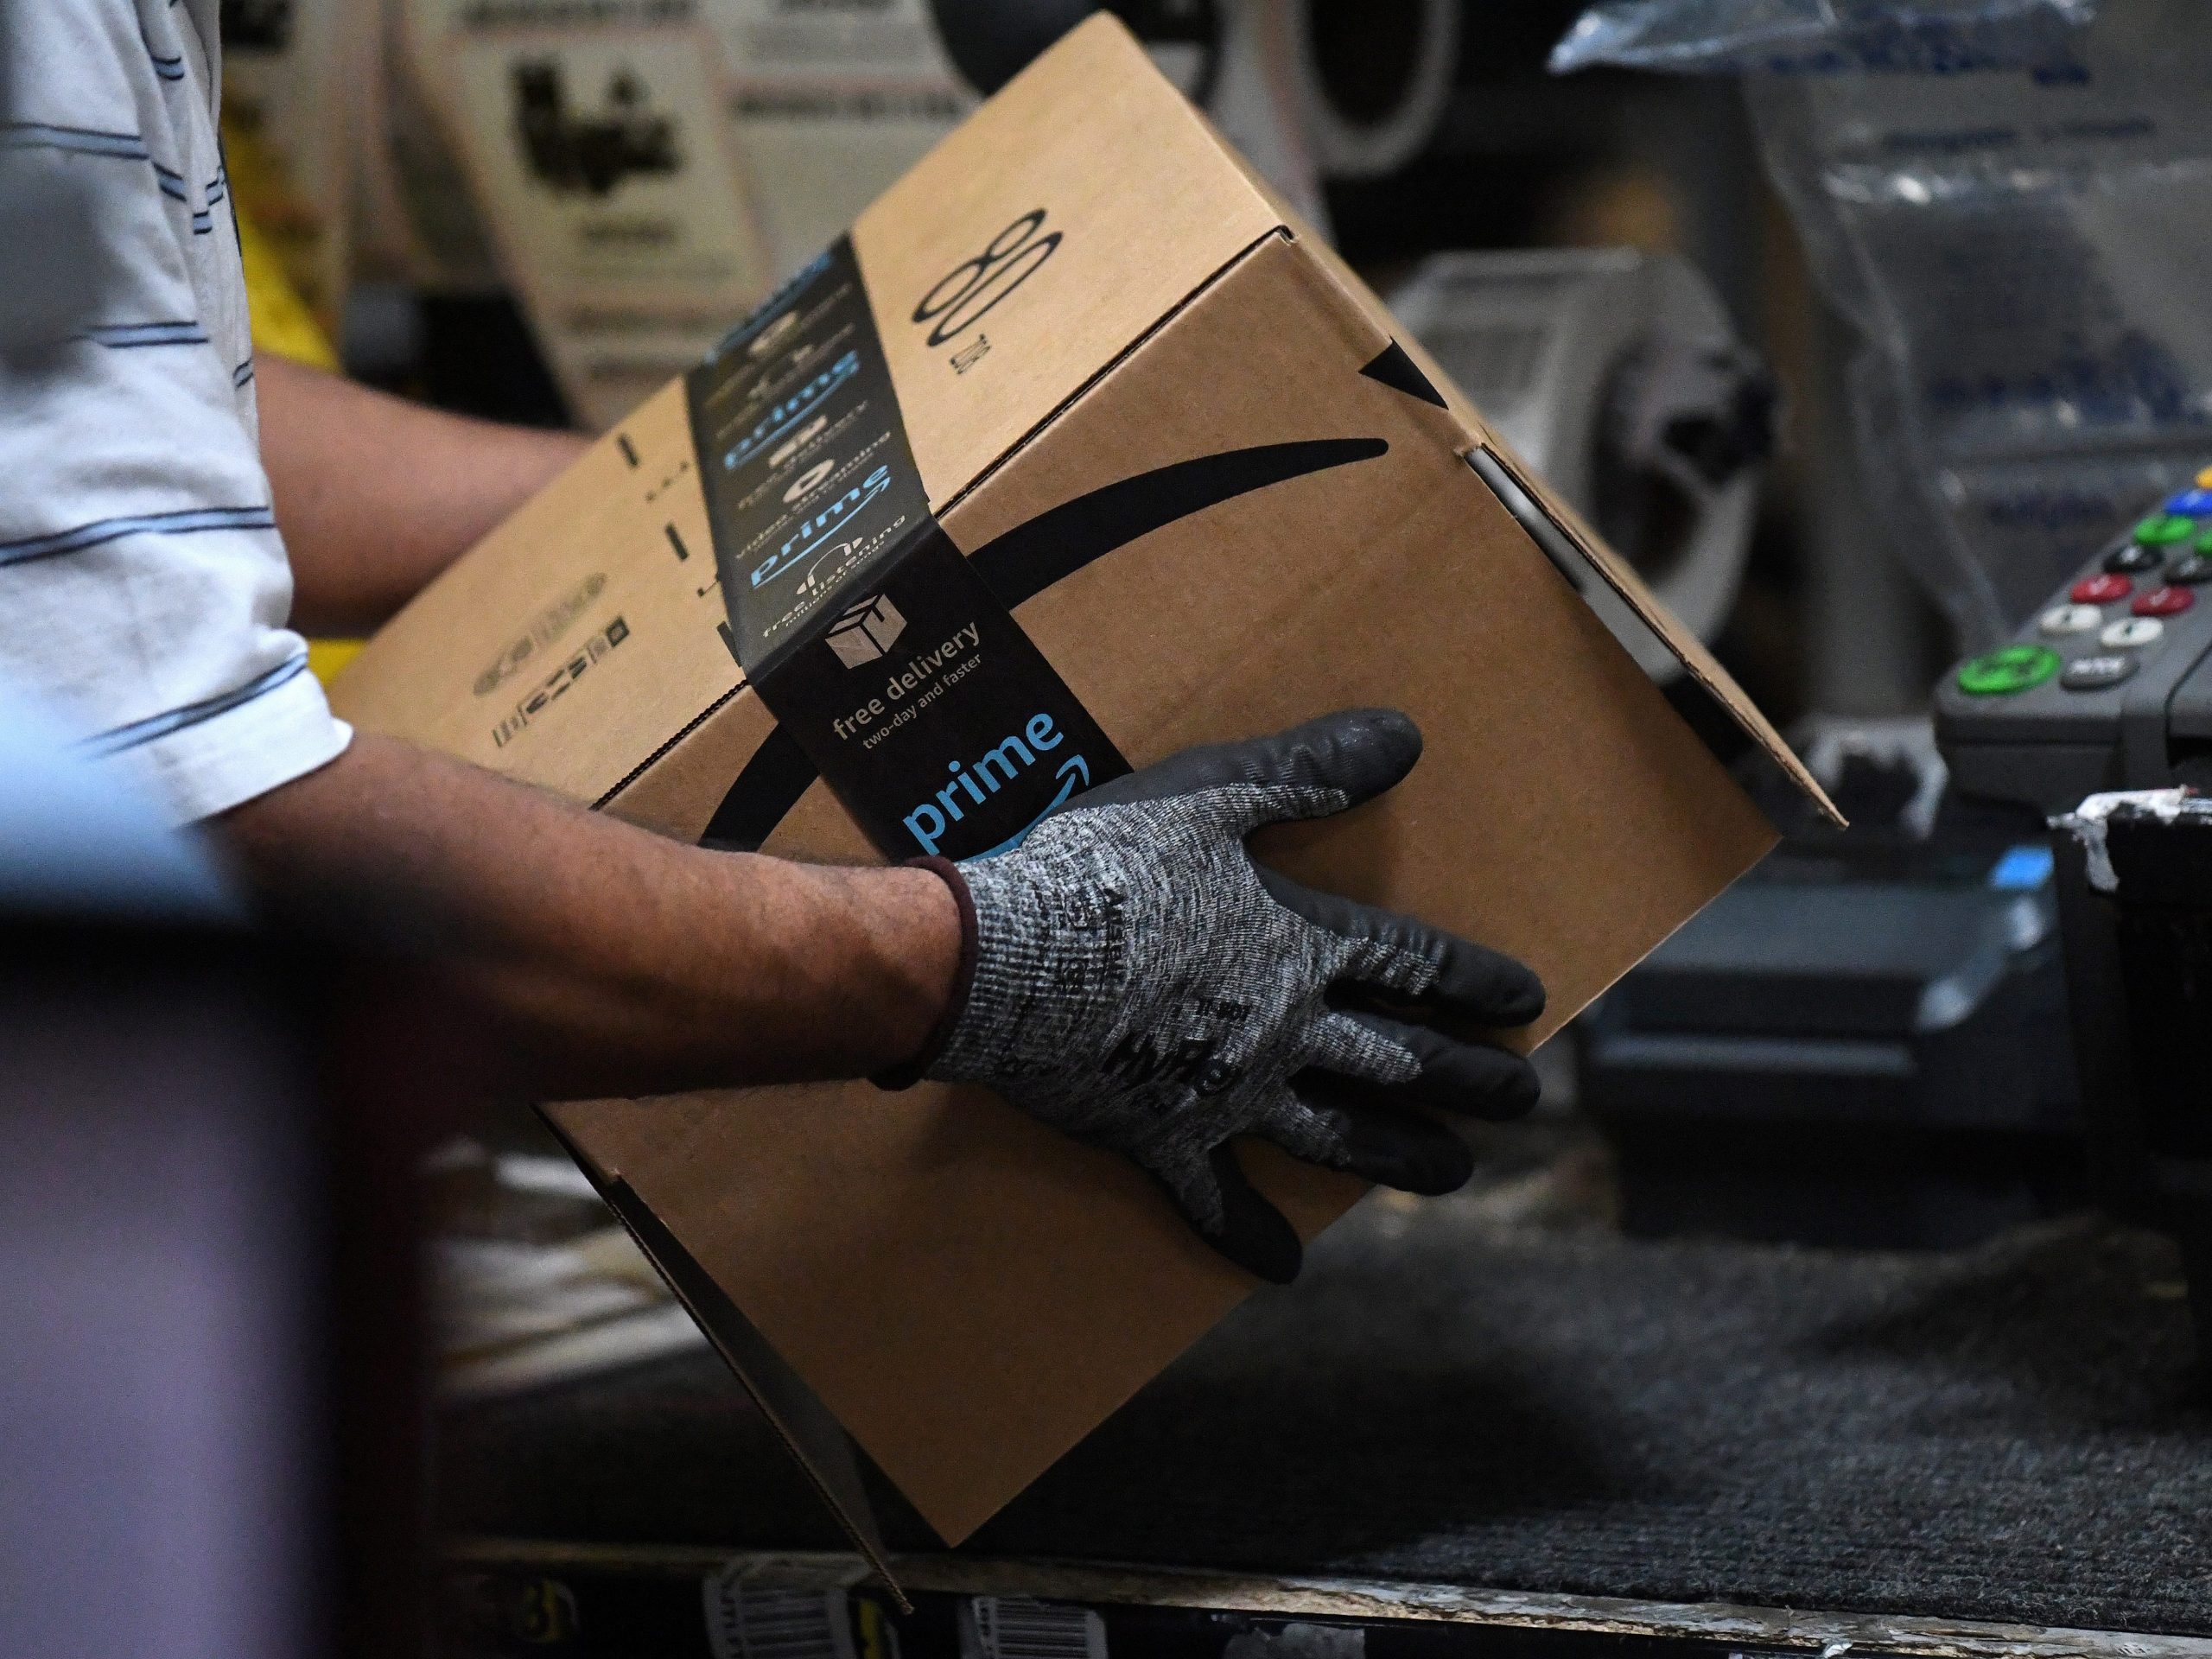 FILE PHOTO: A worker assembles a box for delivery at the Amazon fulfillment center in Baltimore, Maryland, U.S., April 30, 2019. REUTERS/Clodagh Kilcoyne/File Photo